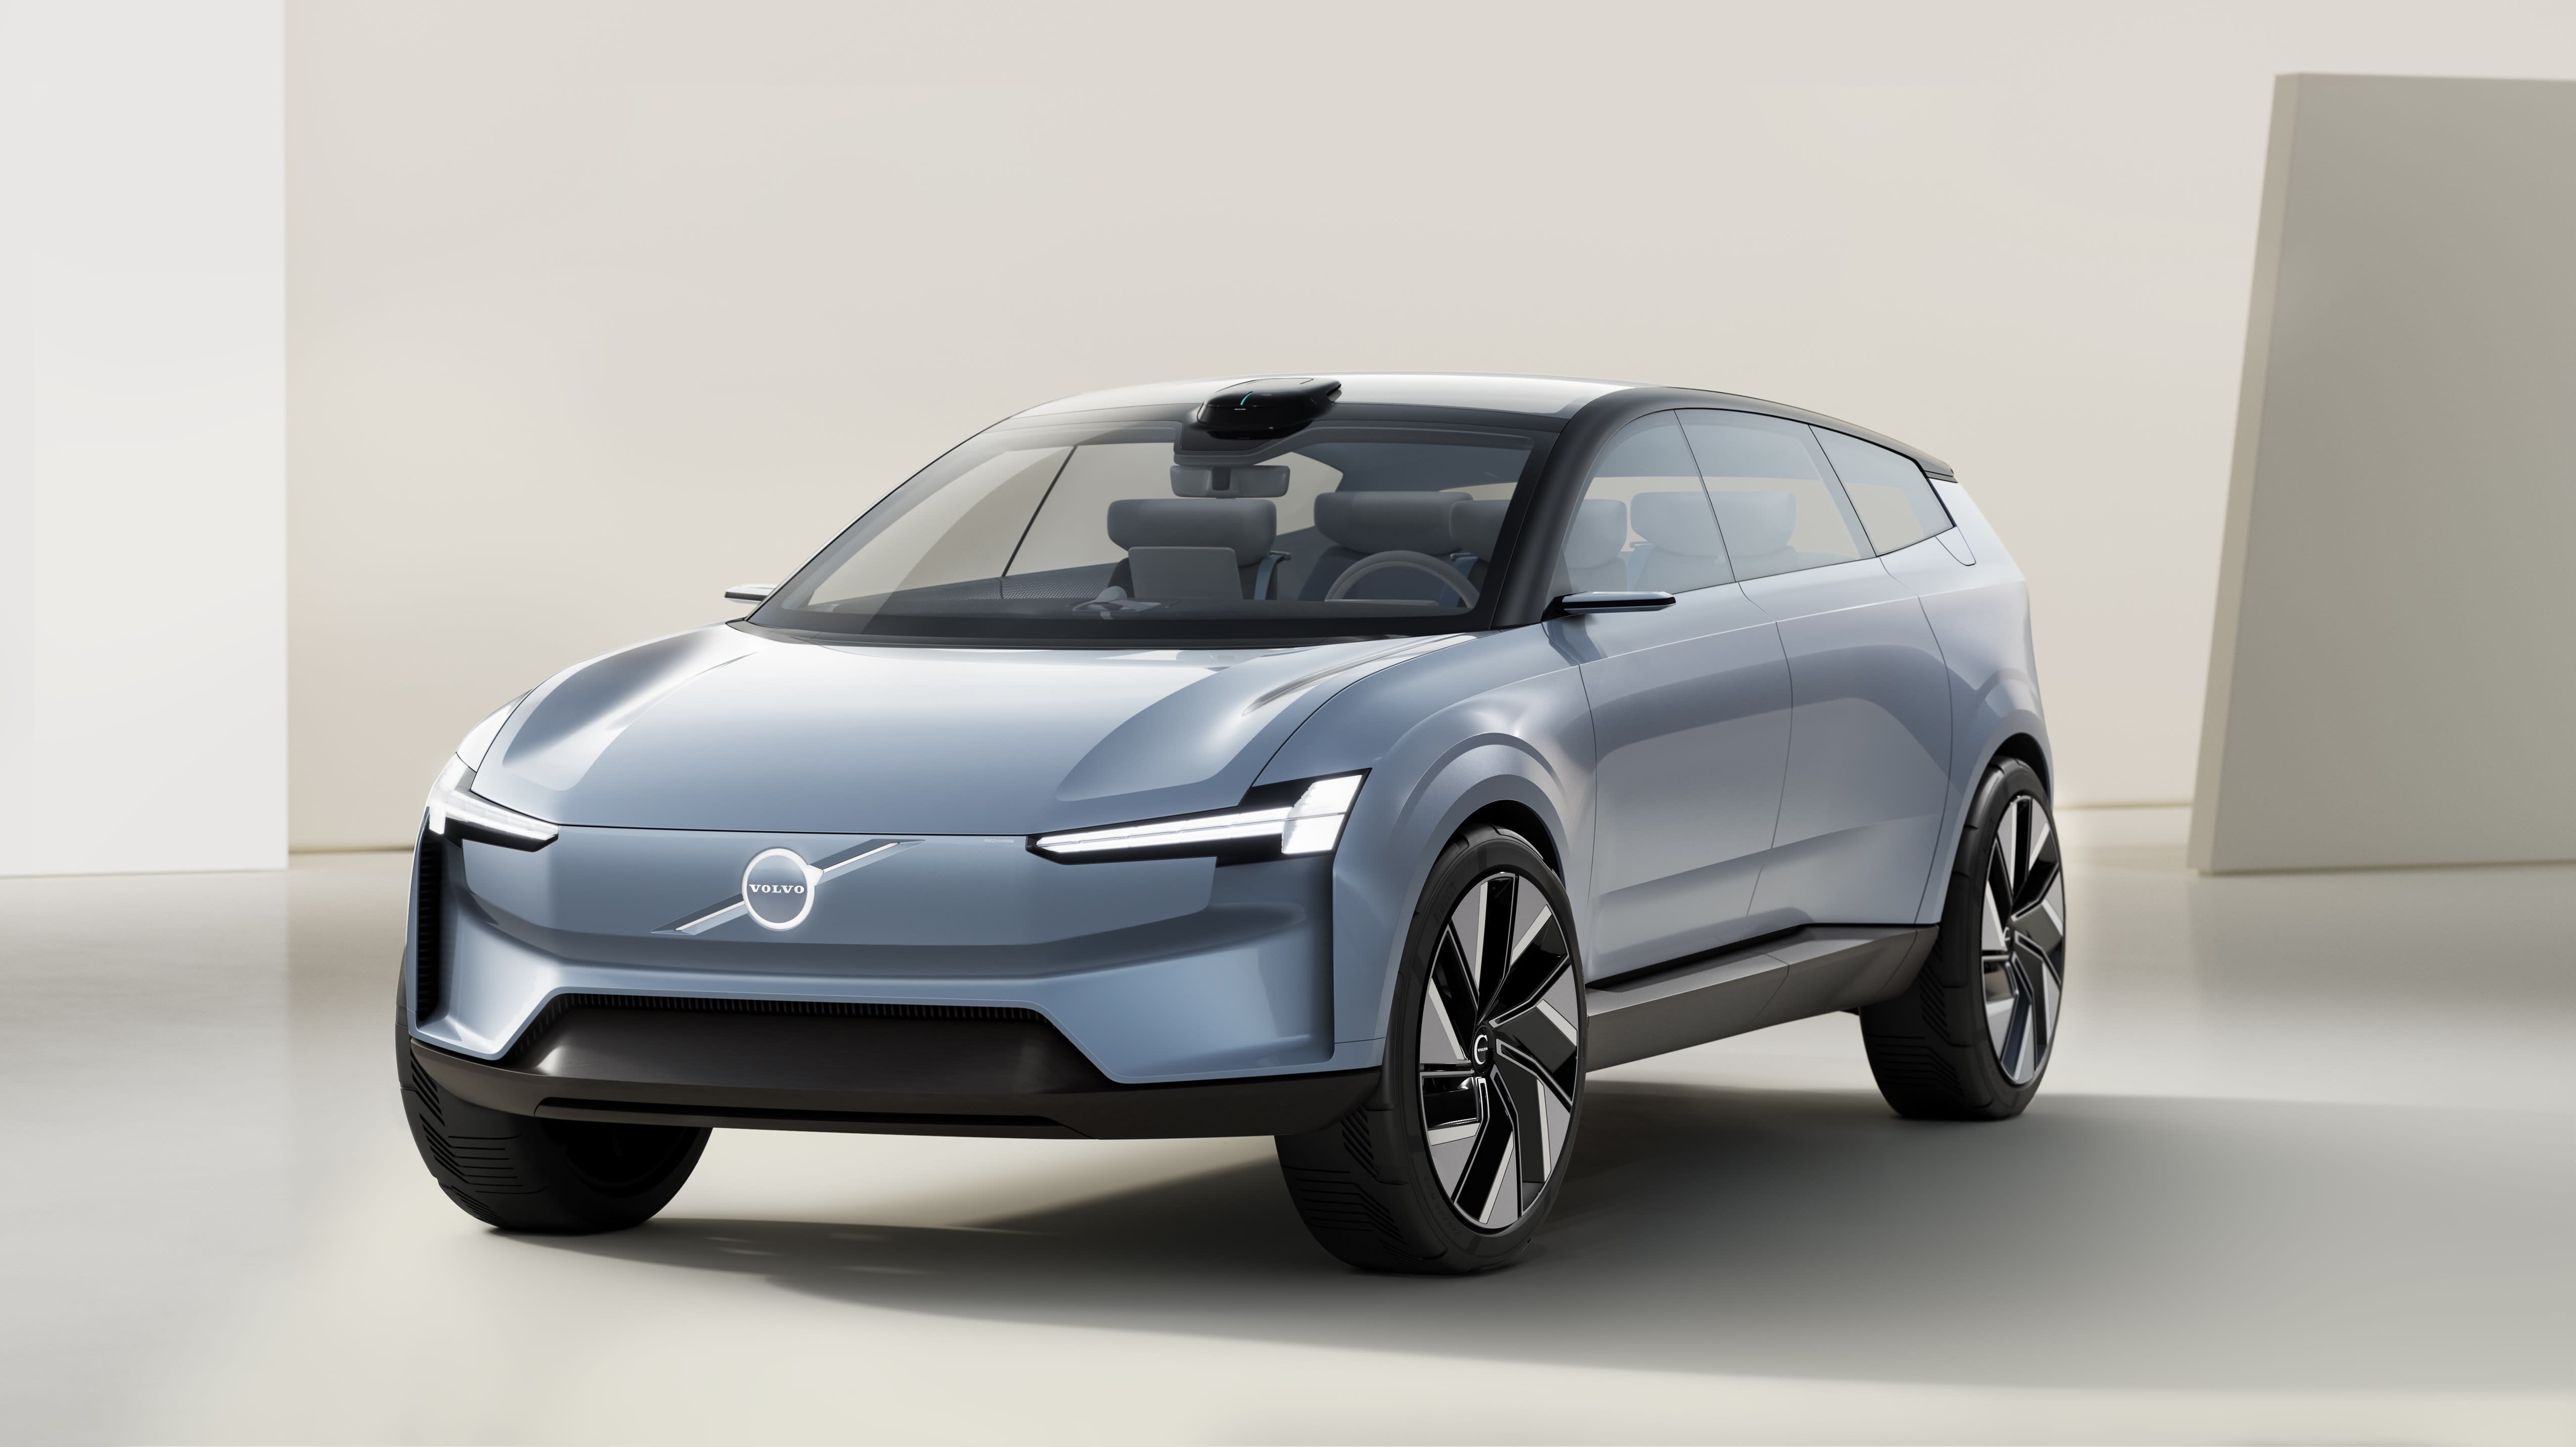 Volvo unveils EV concept with suicide doors as ‘manifesto’ for its all-electric future